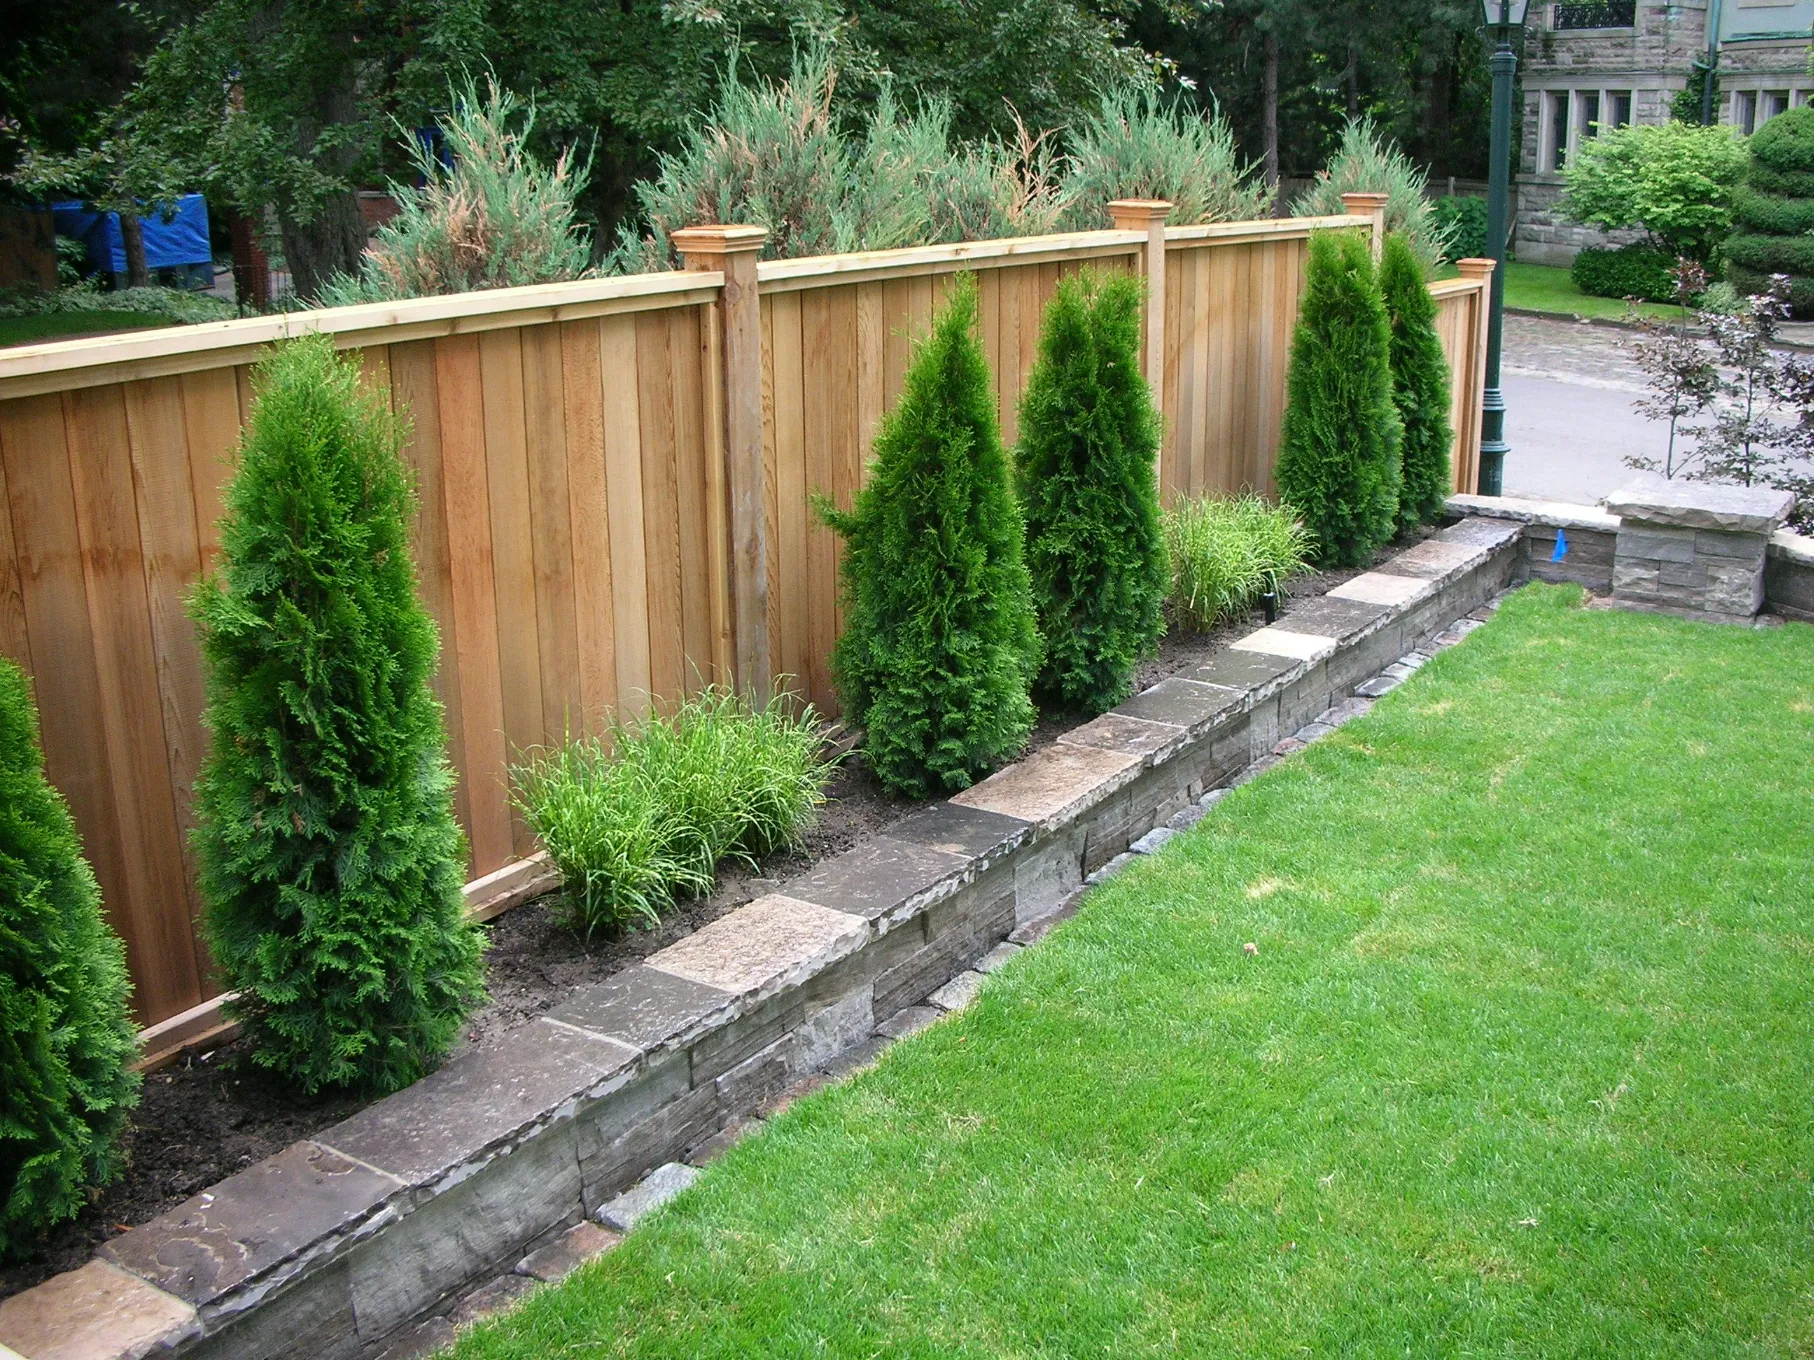 Wood privacy fence with flower bed in front